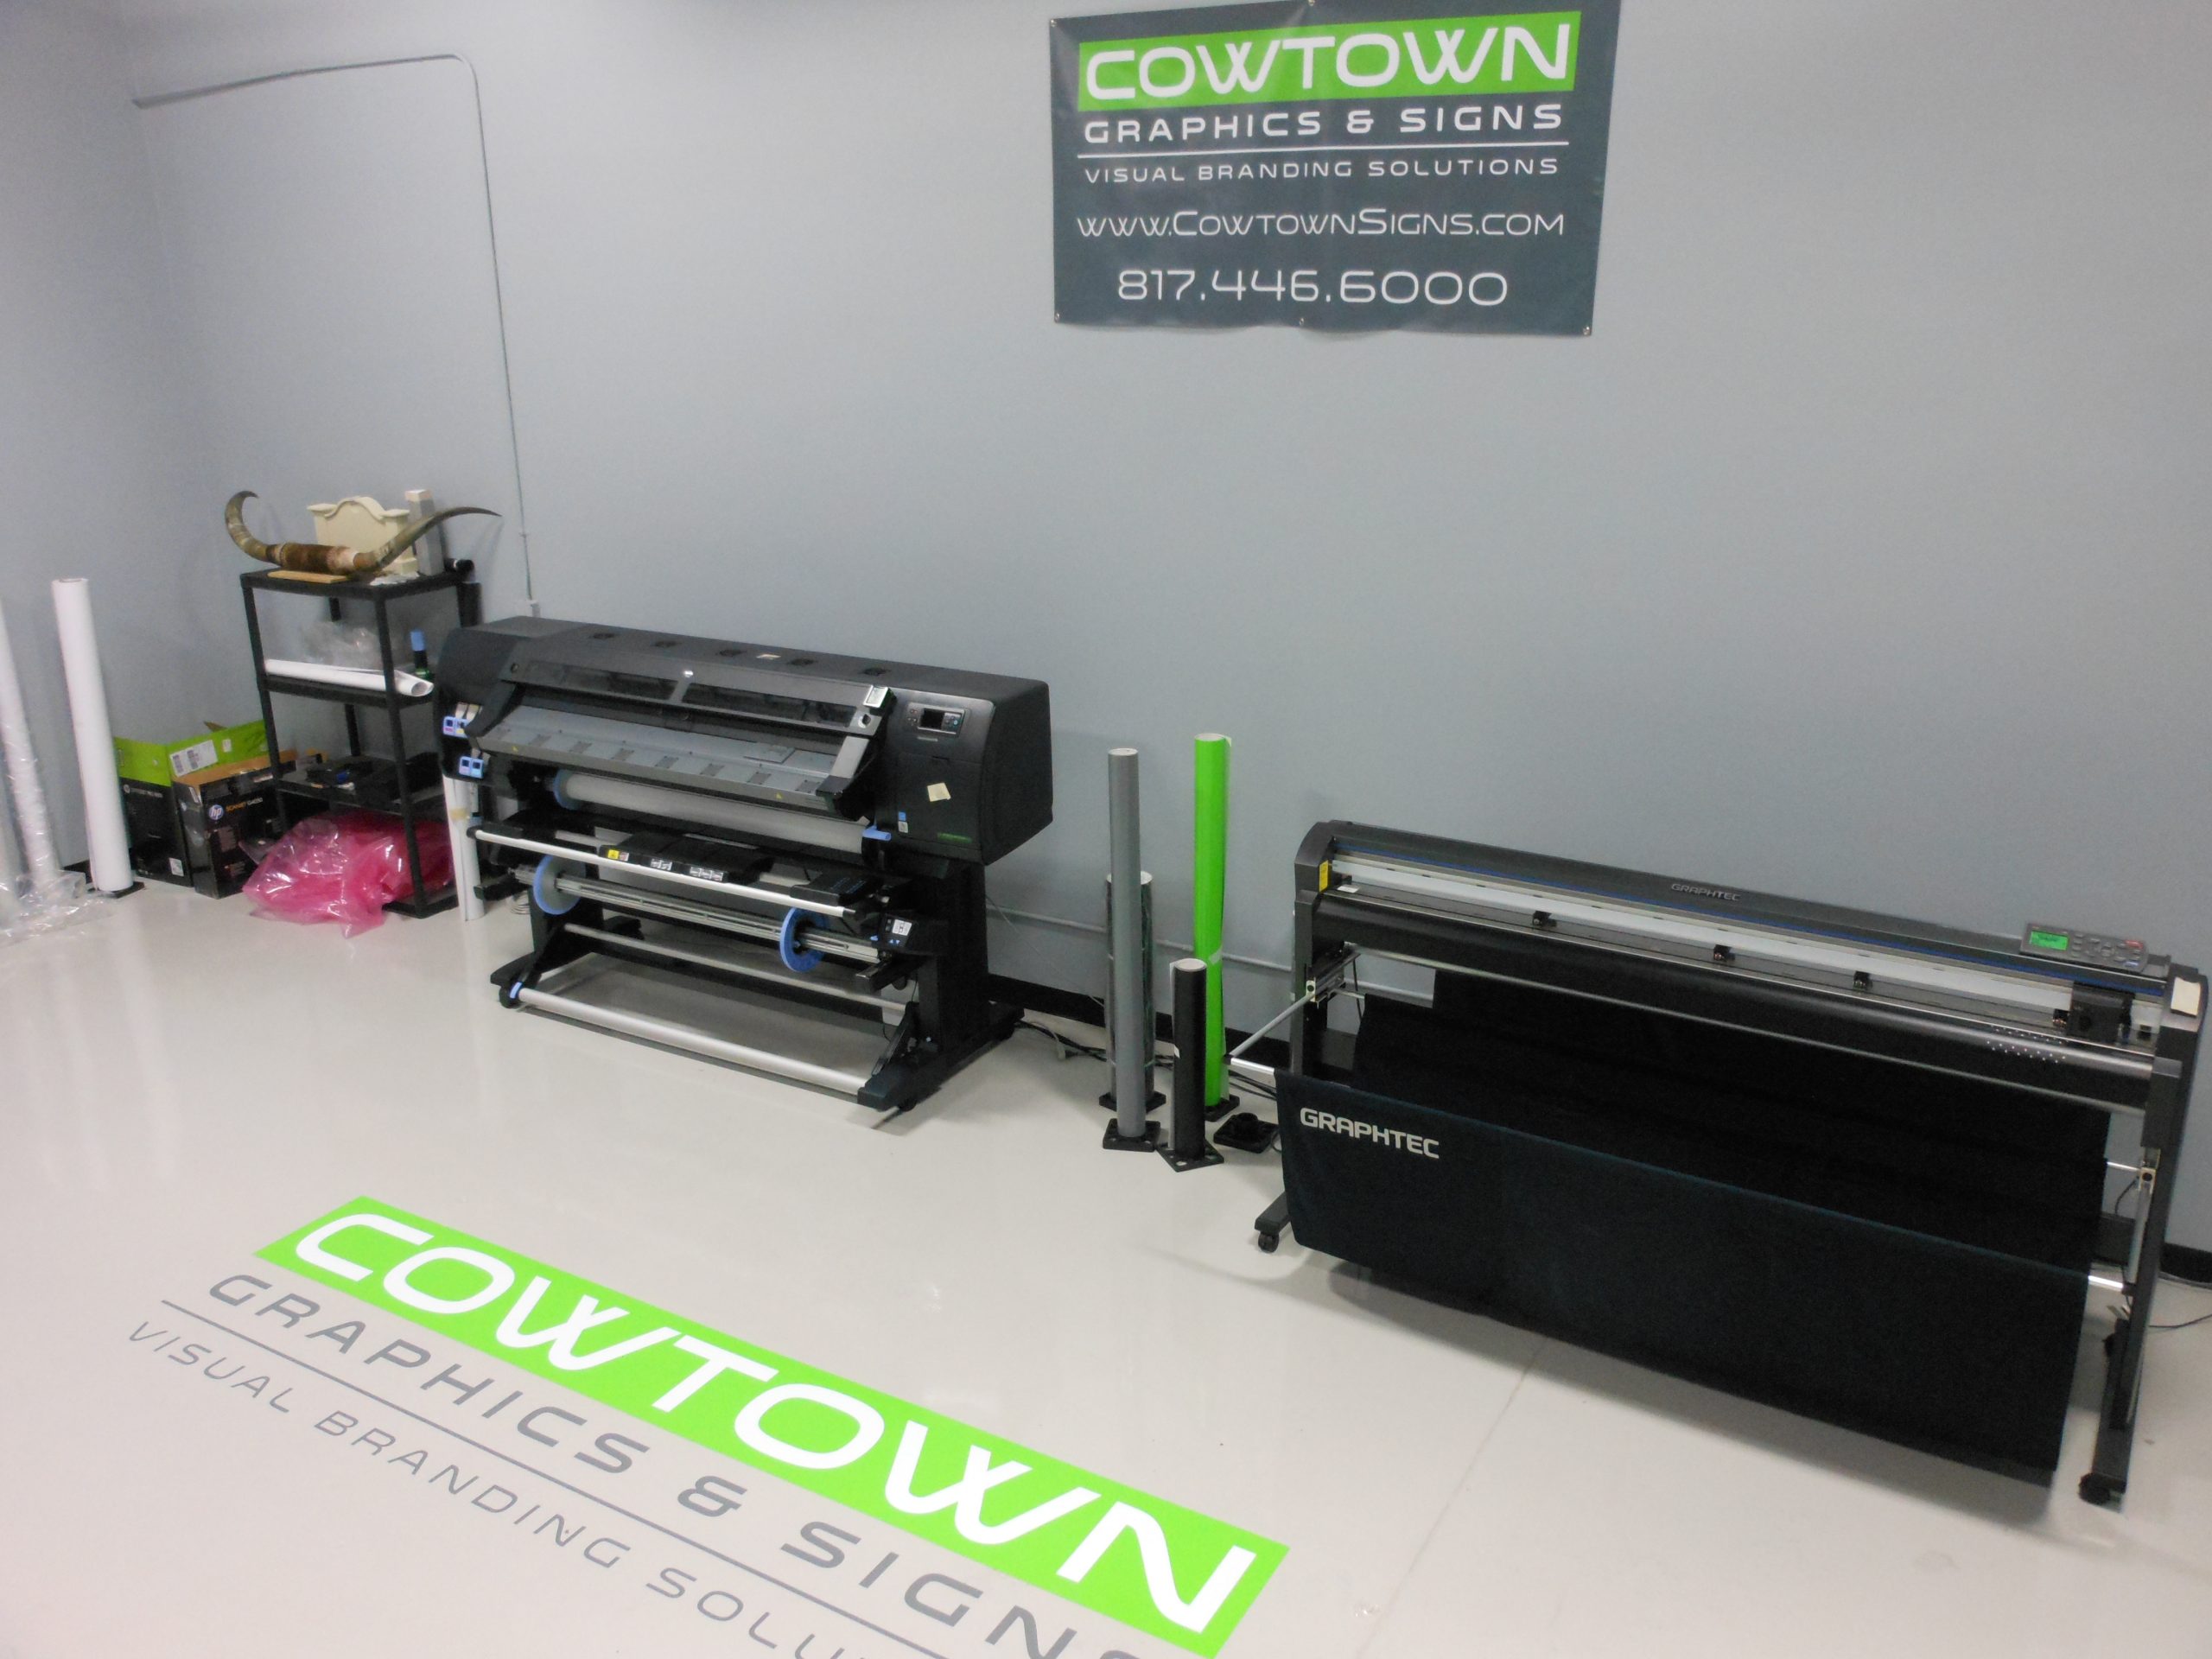 Cowtown Graphics & Signs